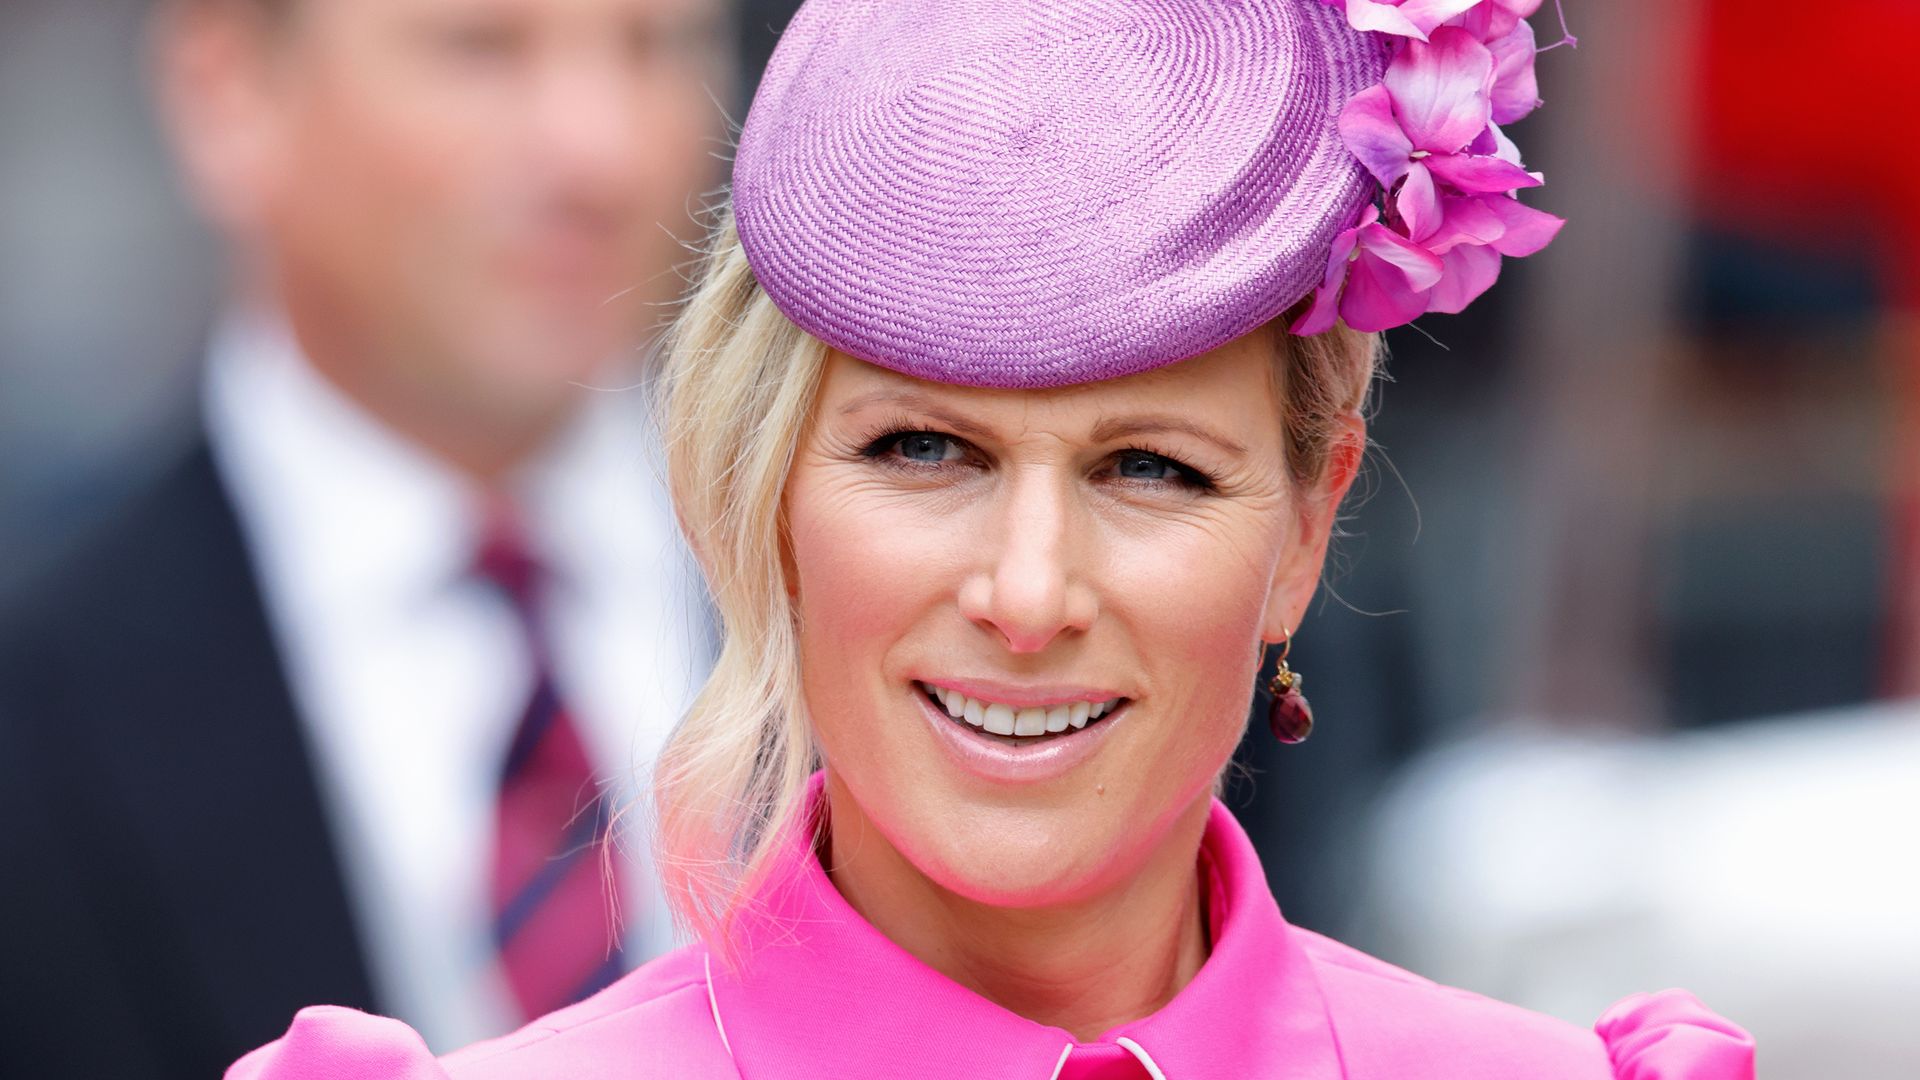 Zara Tindall oozes elegance in romantic dress and fantastical headpiece